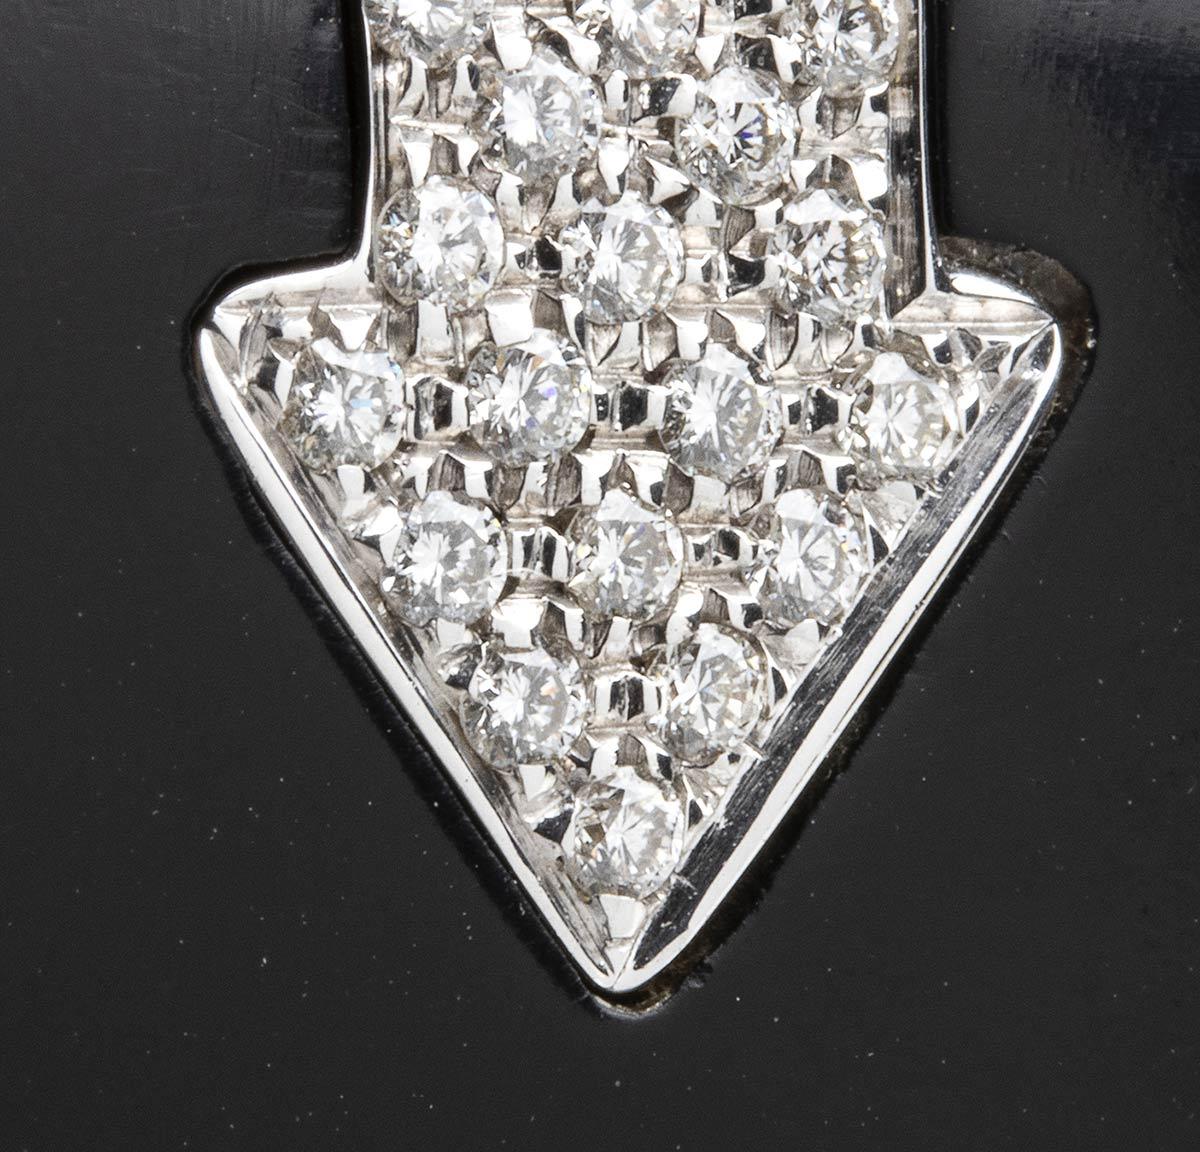 Gianni Bulgari, 18k white gold, with black jet pendant, arrow and hook design paved with round brilliant diamonds approx. 0.80 ct, E-F, IF-VVS. Signed ENIGMA. Hallmarked 